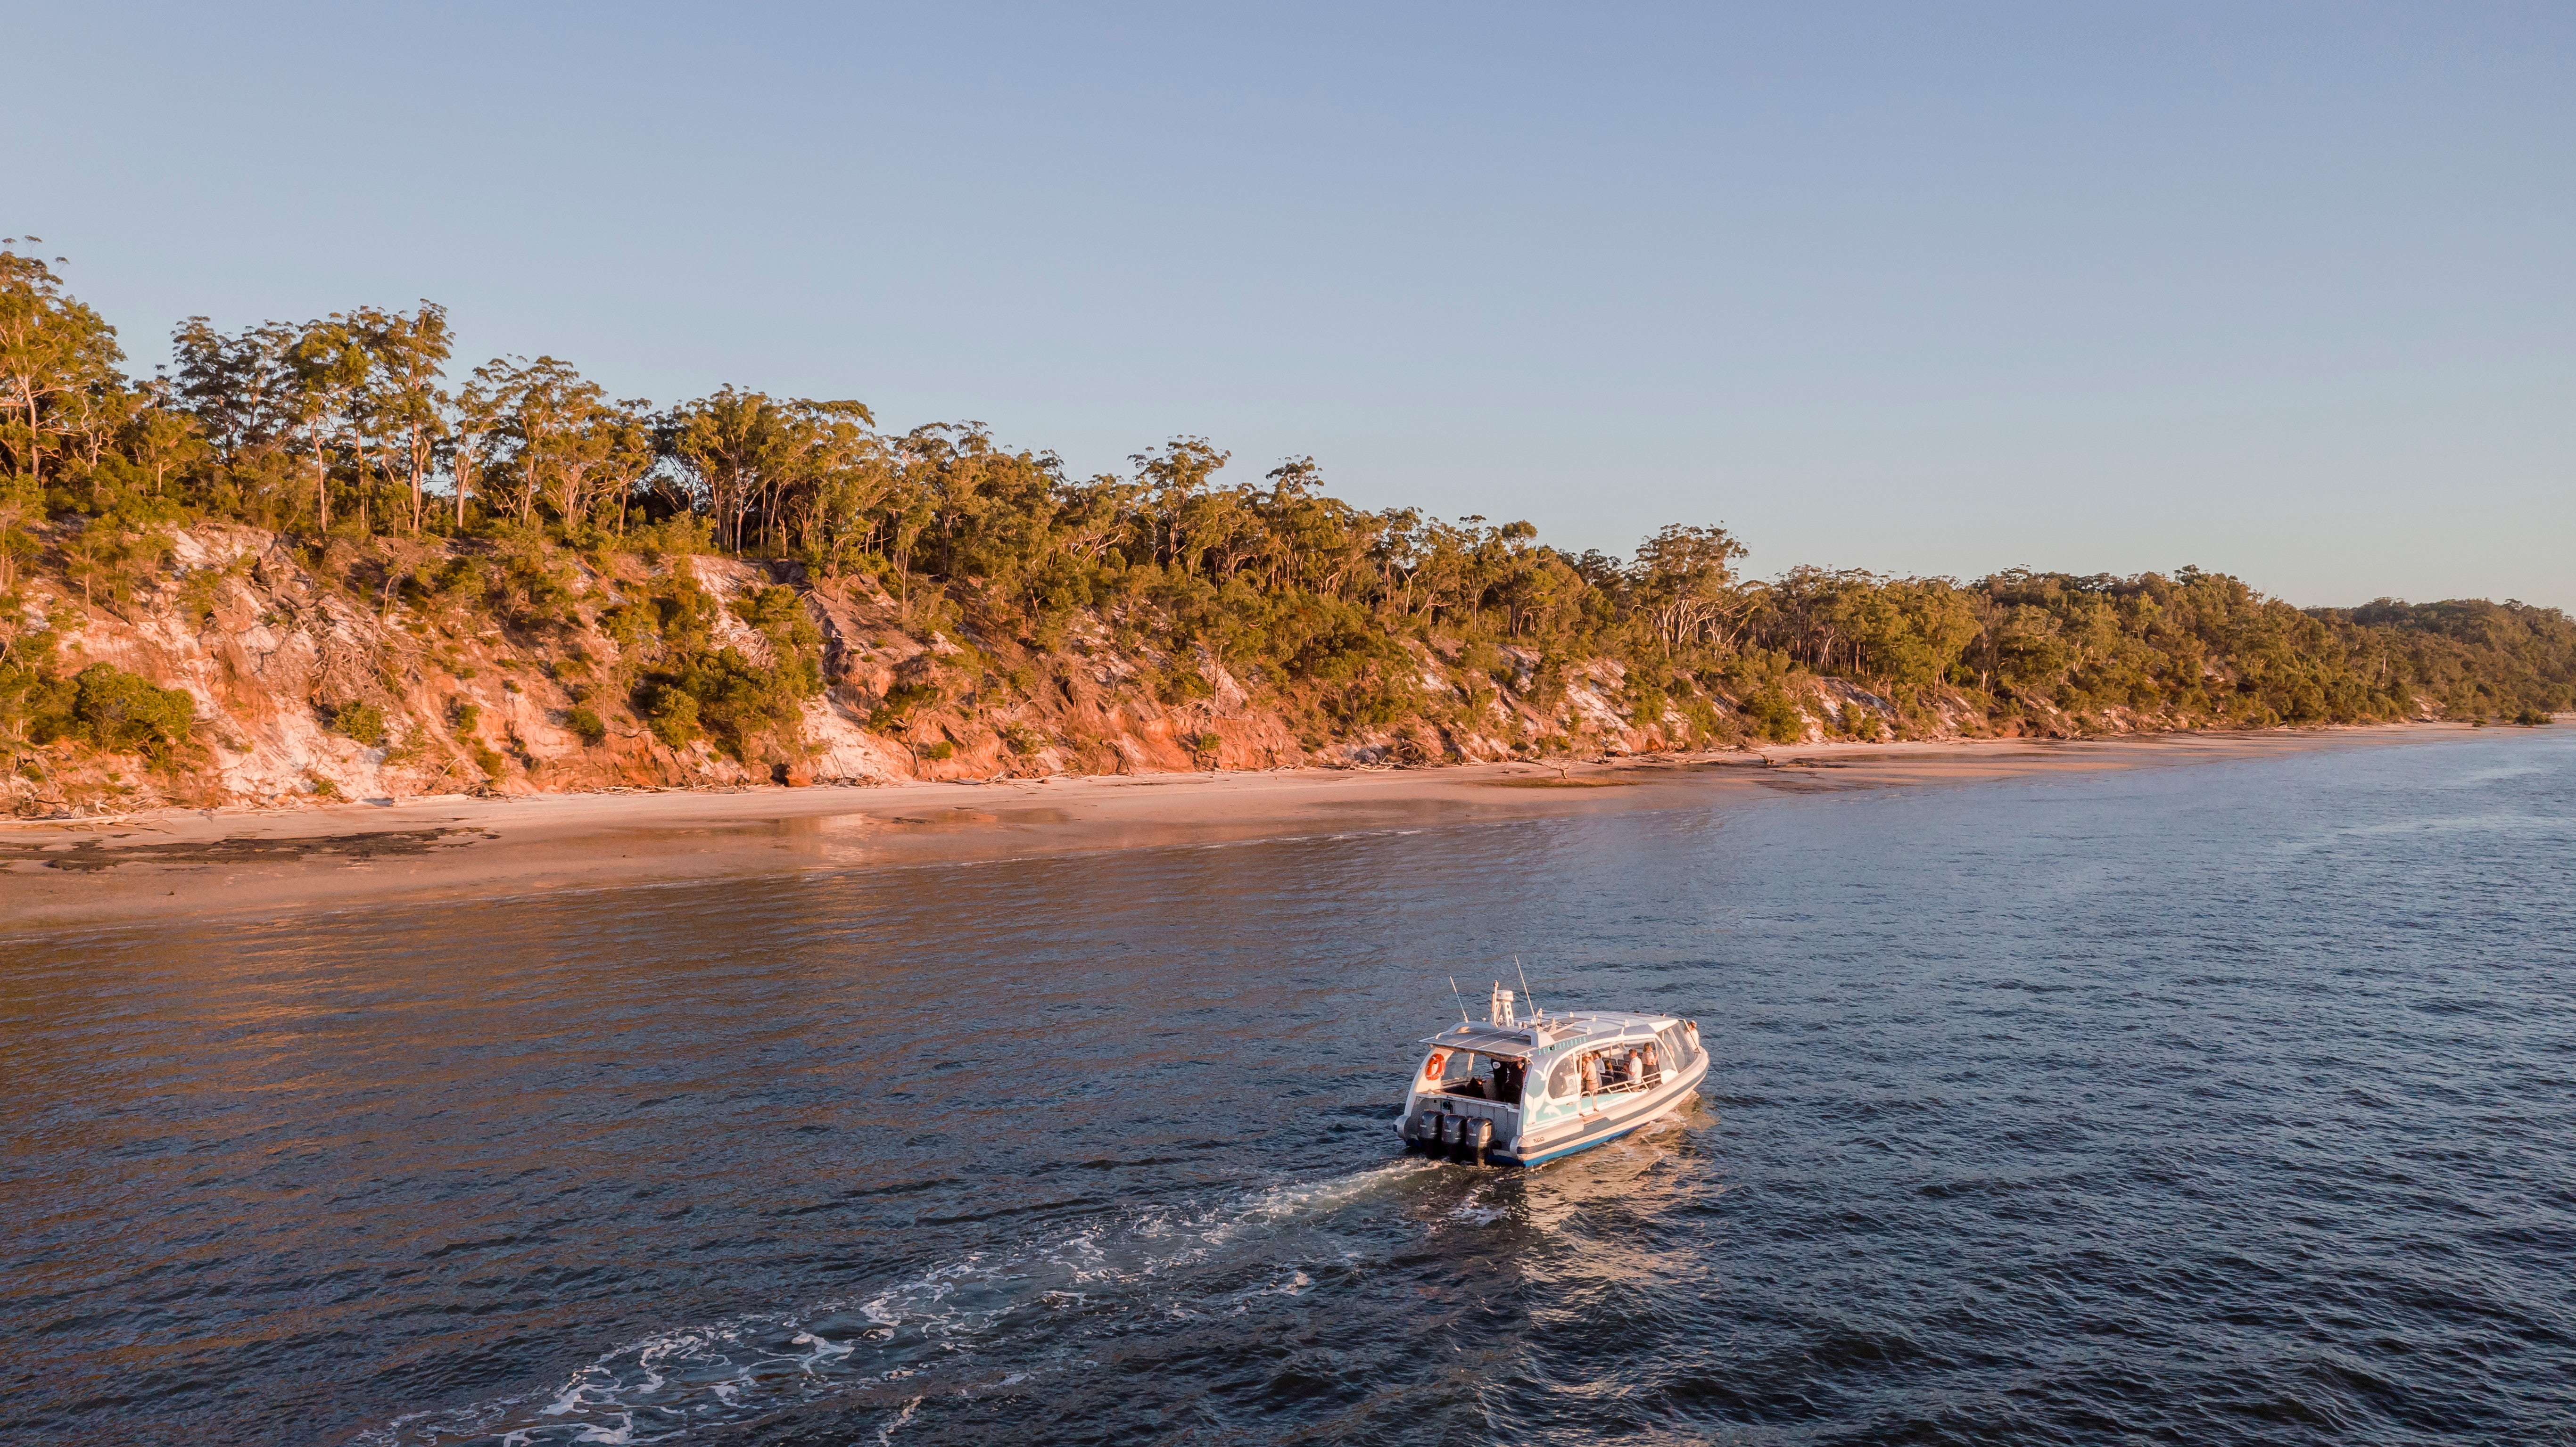 Queensland’s islands are stunning gateways to sun-drenched landscapes and marine adventures